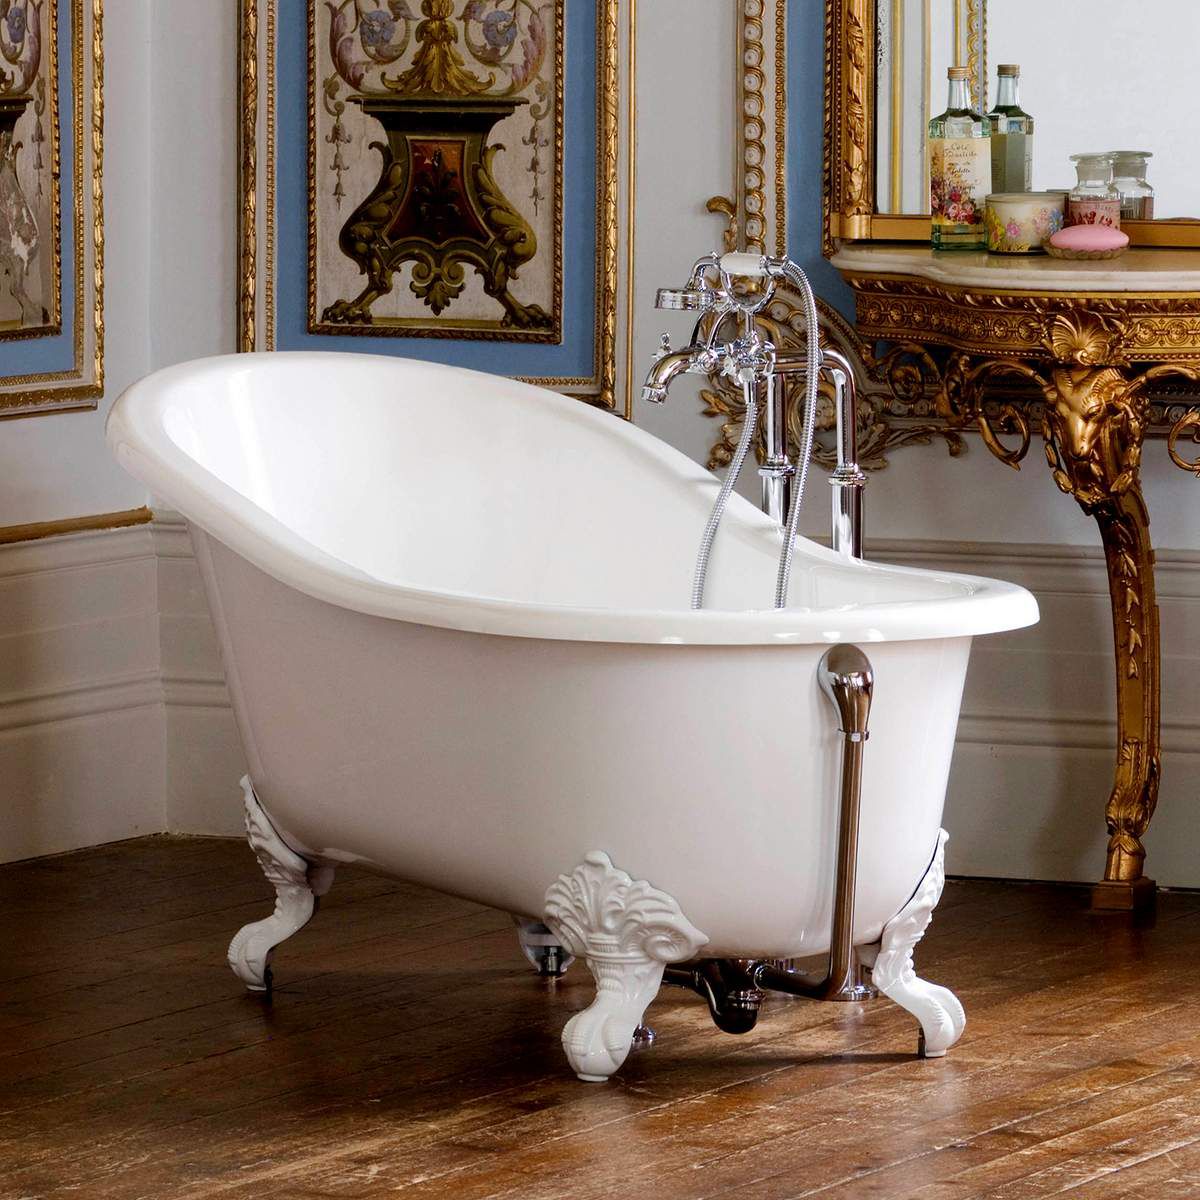 Freestanding Tubs Products - Tubs & More Plumbing Showroom